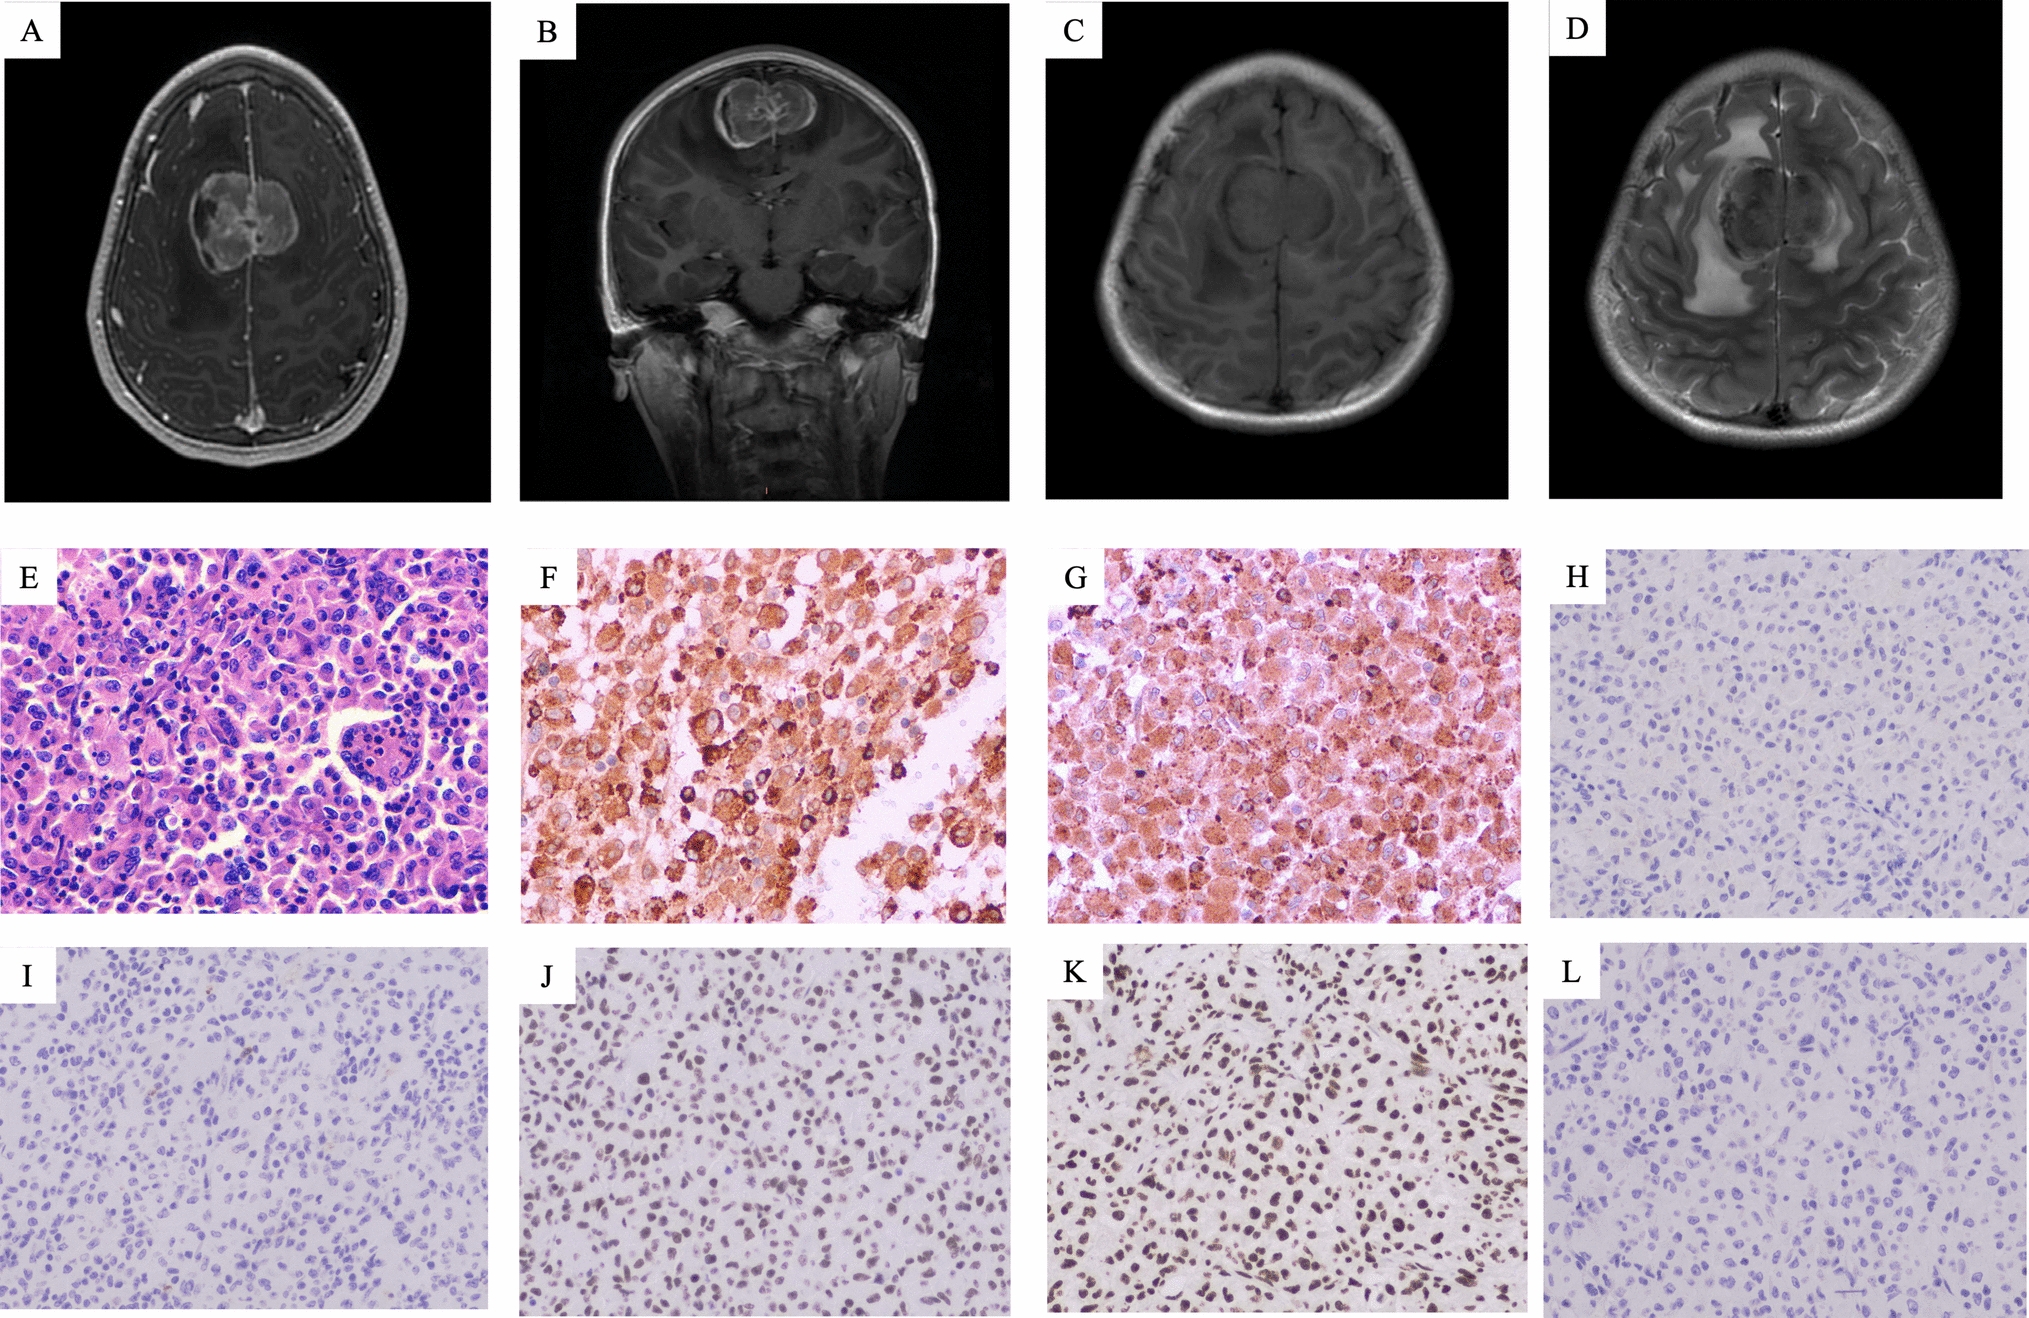 A rare case of primary central nervous system histiocytic sarcoma harboring a novel ARHGAP45::BRAF fusion: a case report and literature review